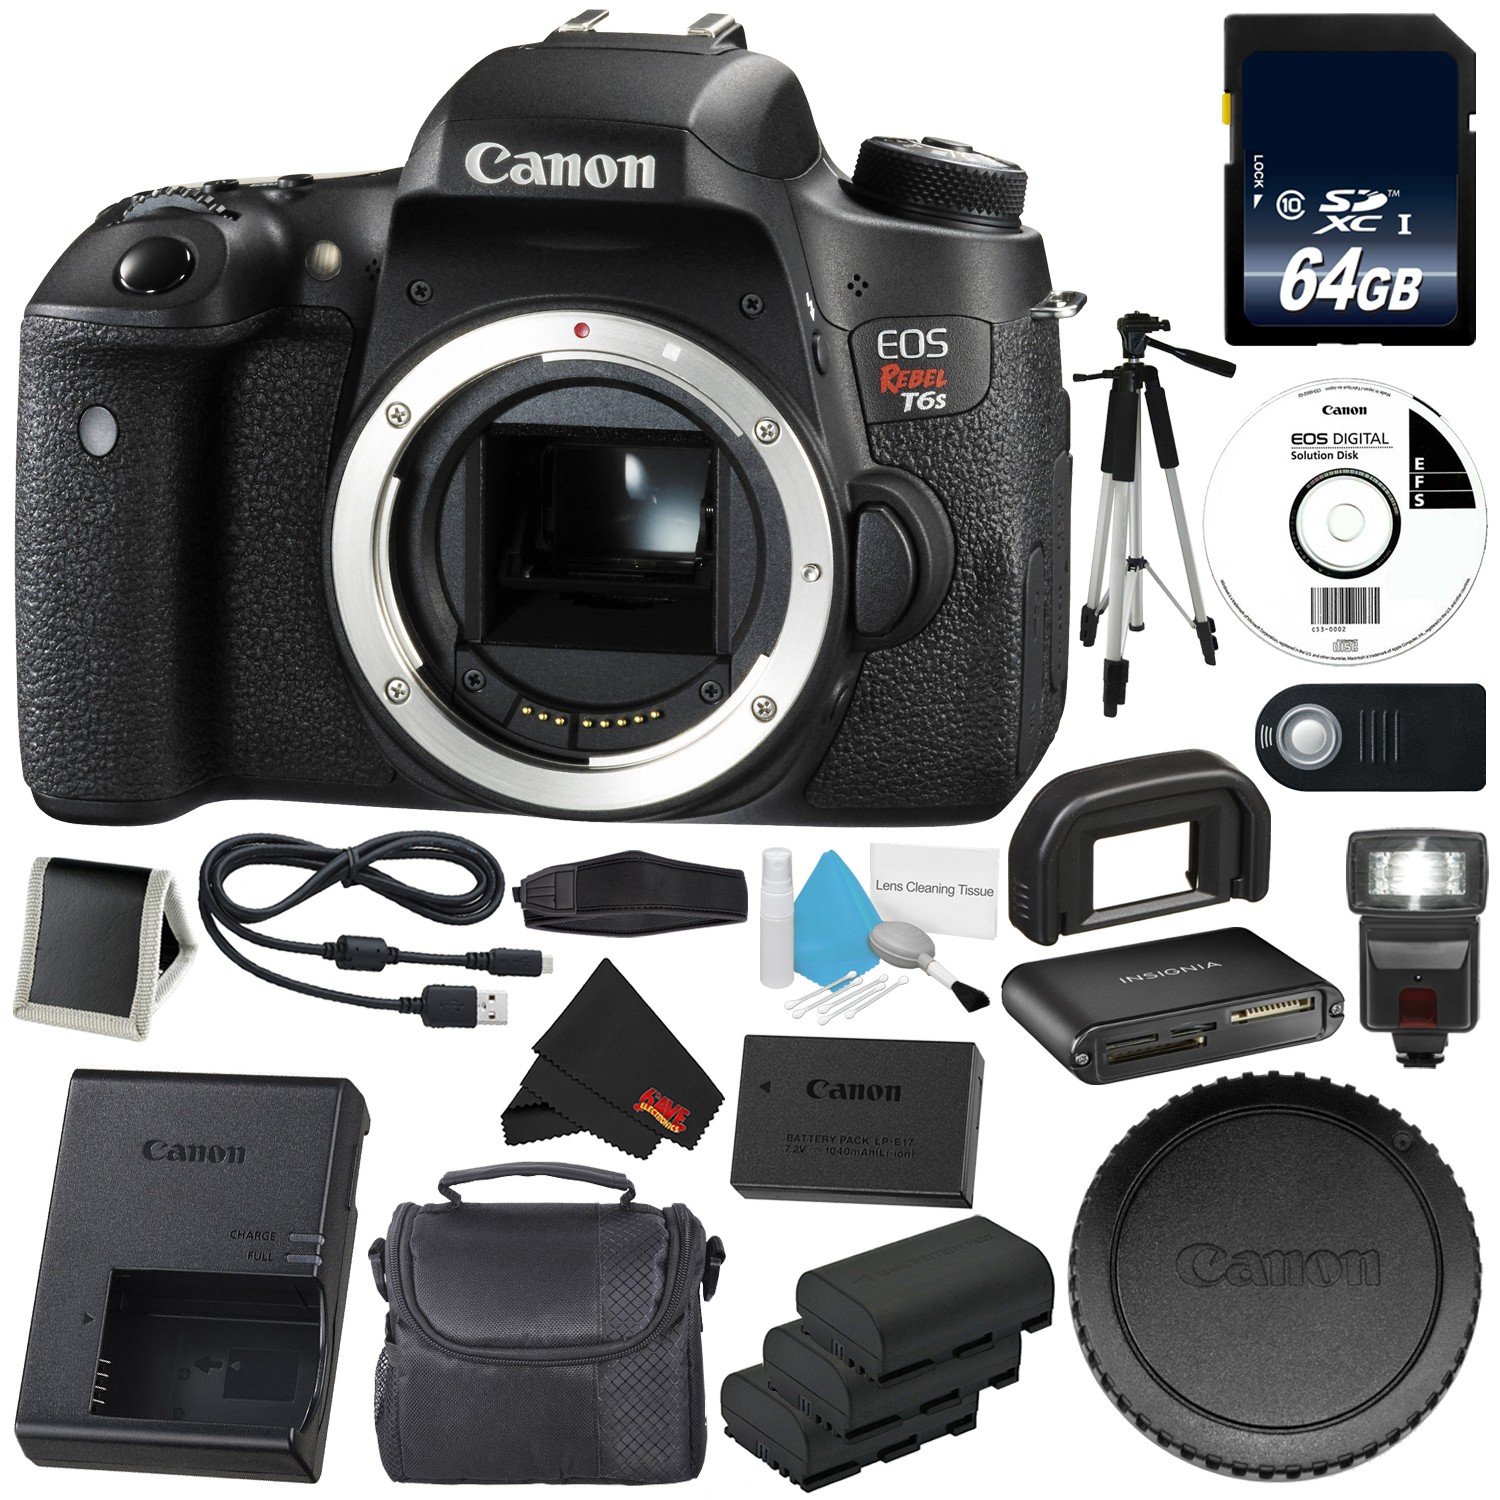 6Ave Canon EOS Rebel T6s DSLR Camera (Body Only) (0020C001) + LP-E17 Replacement Lithium Ion Battery + External Flash +